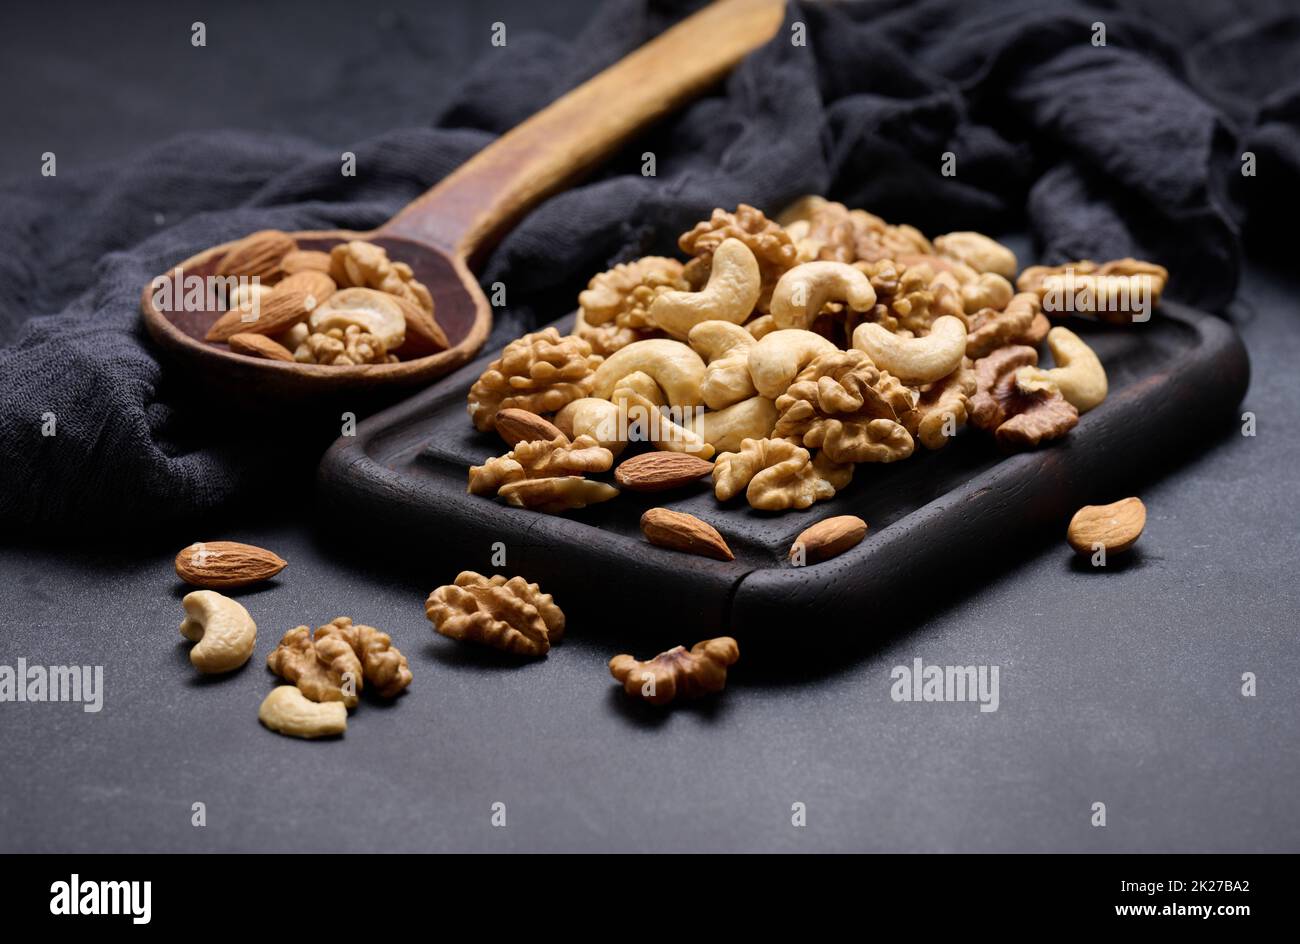 walnut, almond, cashew on a wooden board. Delicious nutritious snack Stock Photo